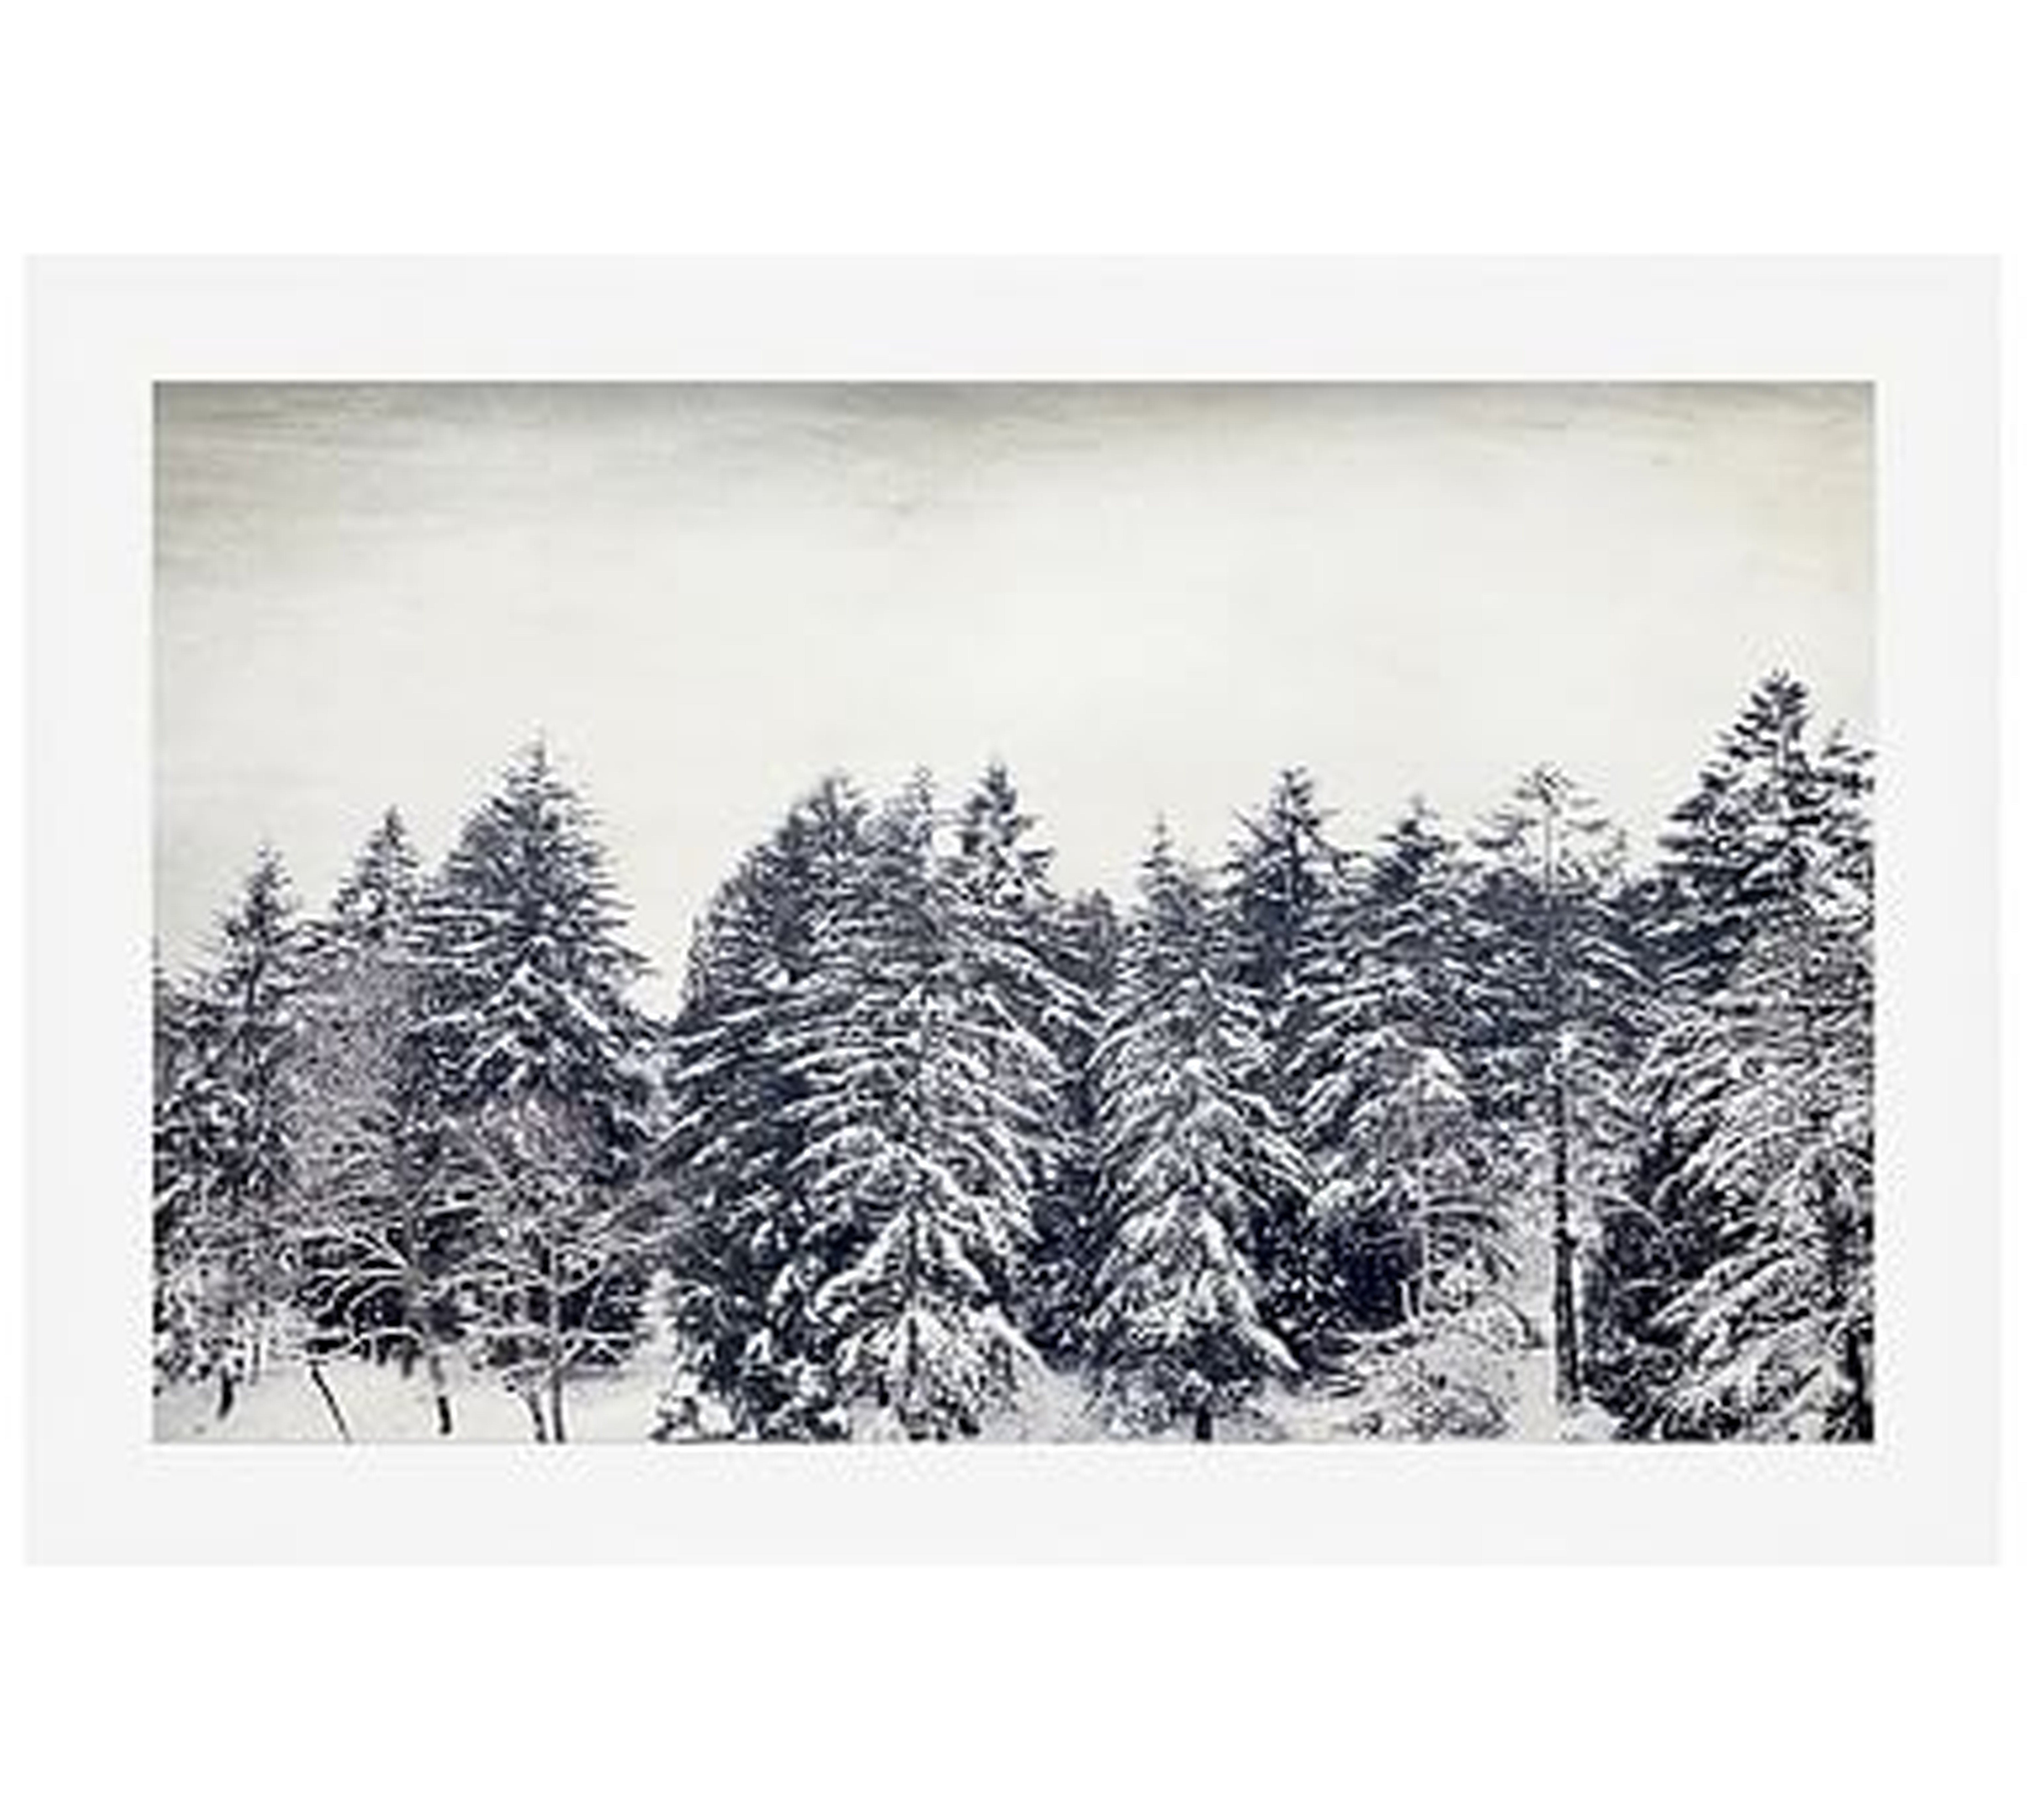 Pacific Snow Paper Print By Lupen Grainne, 42 x 28", Wood Gallery, White, Mat - Pottery Barn